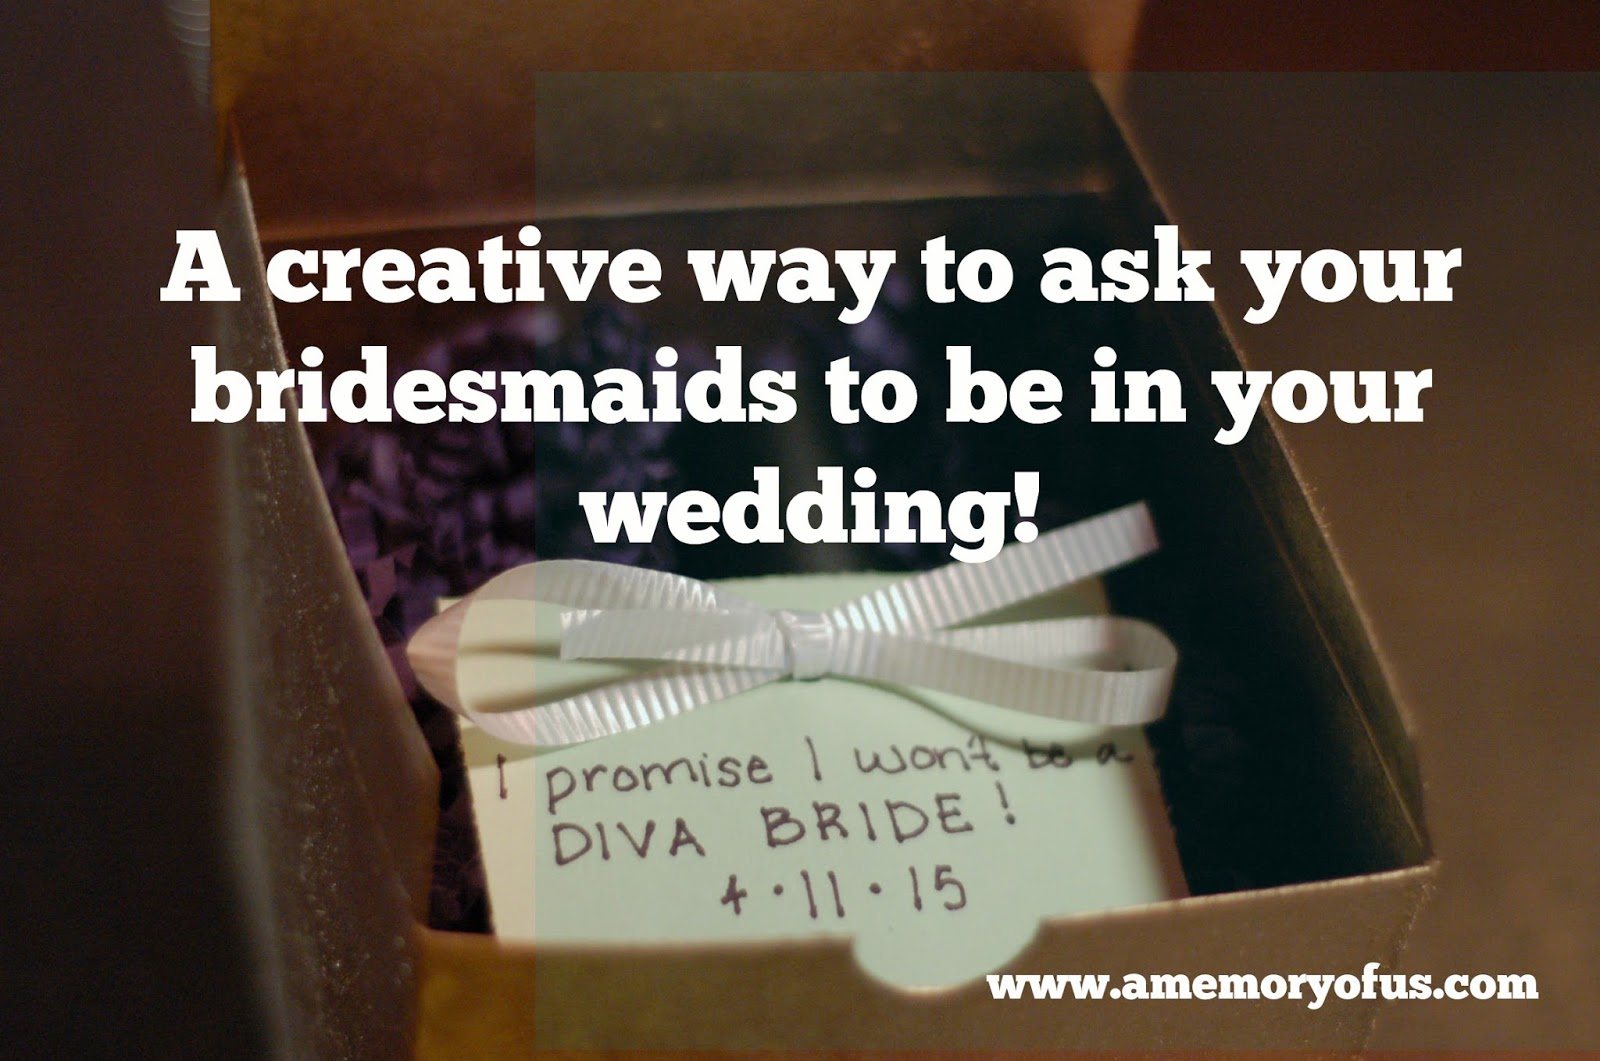 a creative way to ask your bridesmaids to be in your wedding